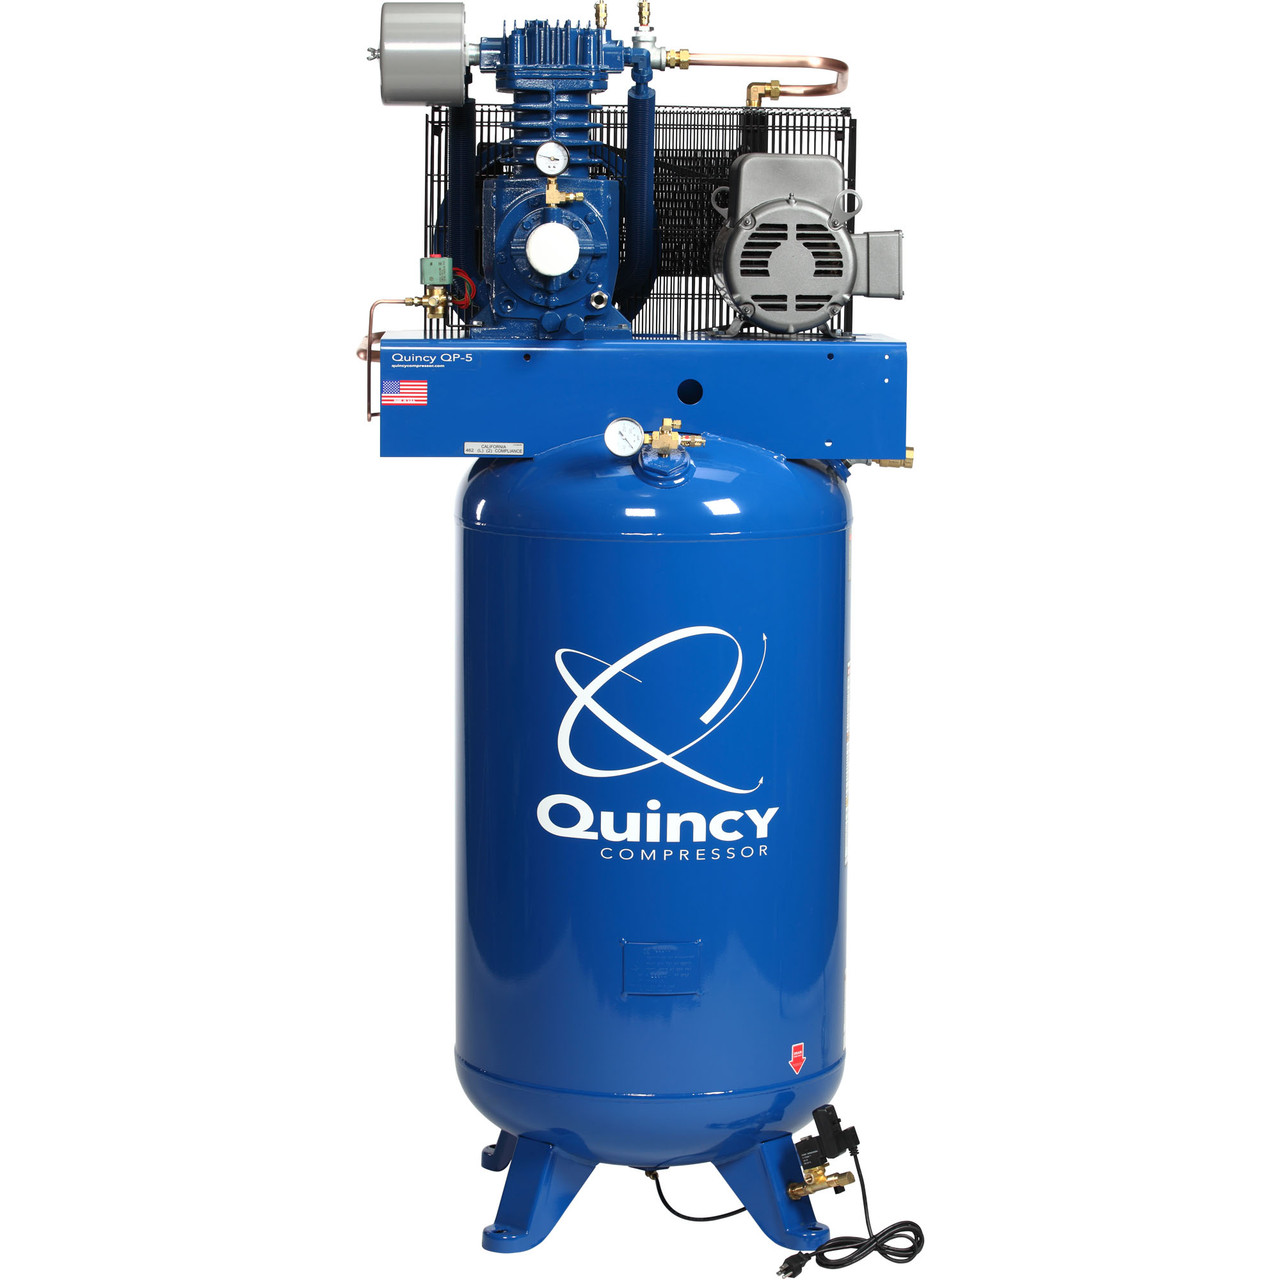 Quincy QP 353D80VCA20M 5 HP MAX, 200 Volt Three Phase, Two Stage, 80 Gallon Vertical Air Compressor